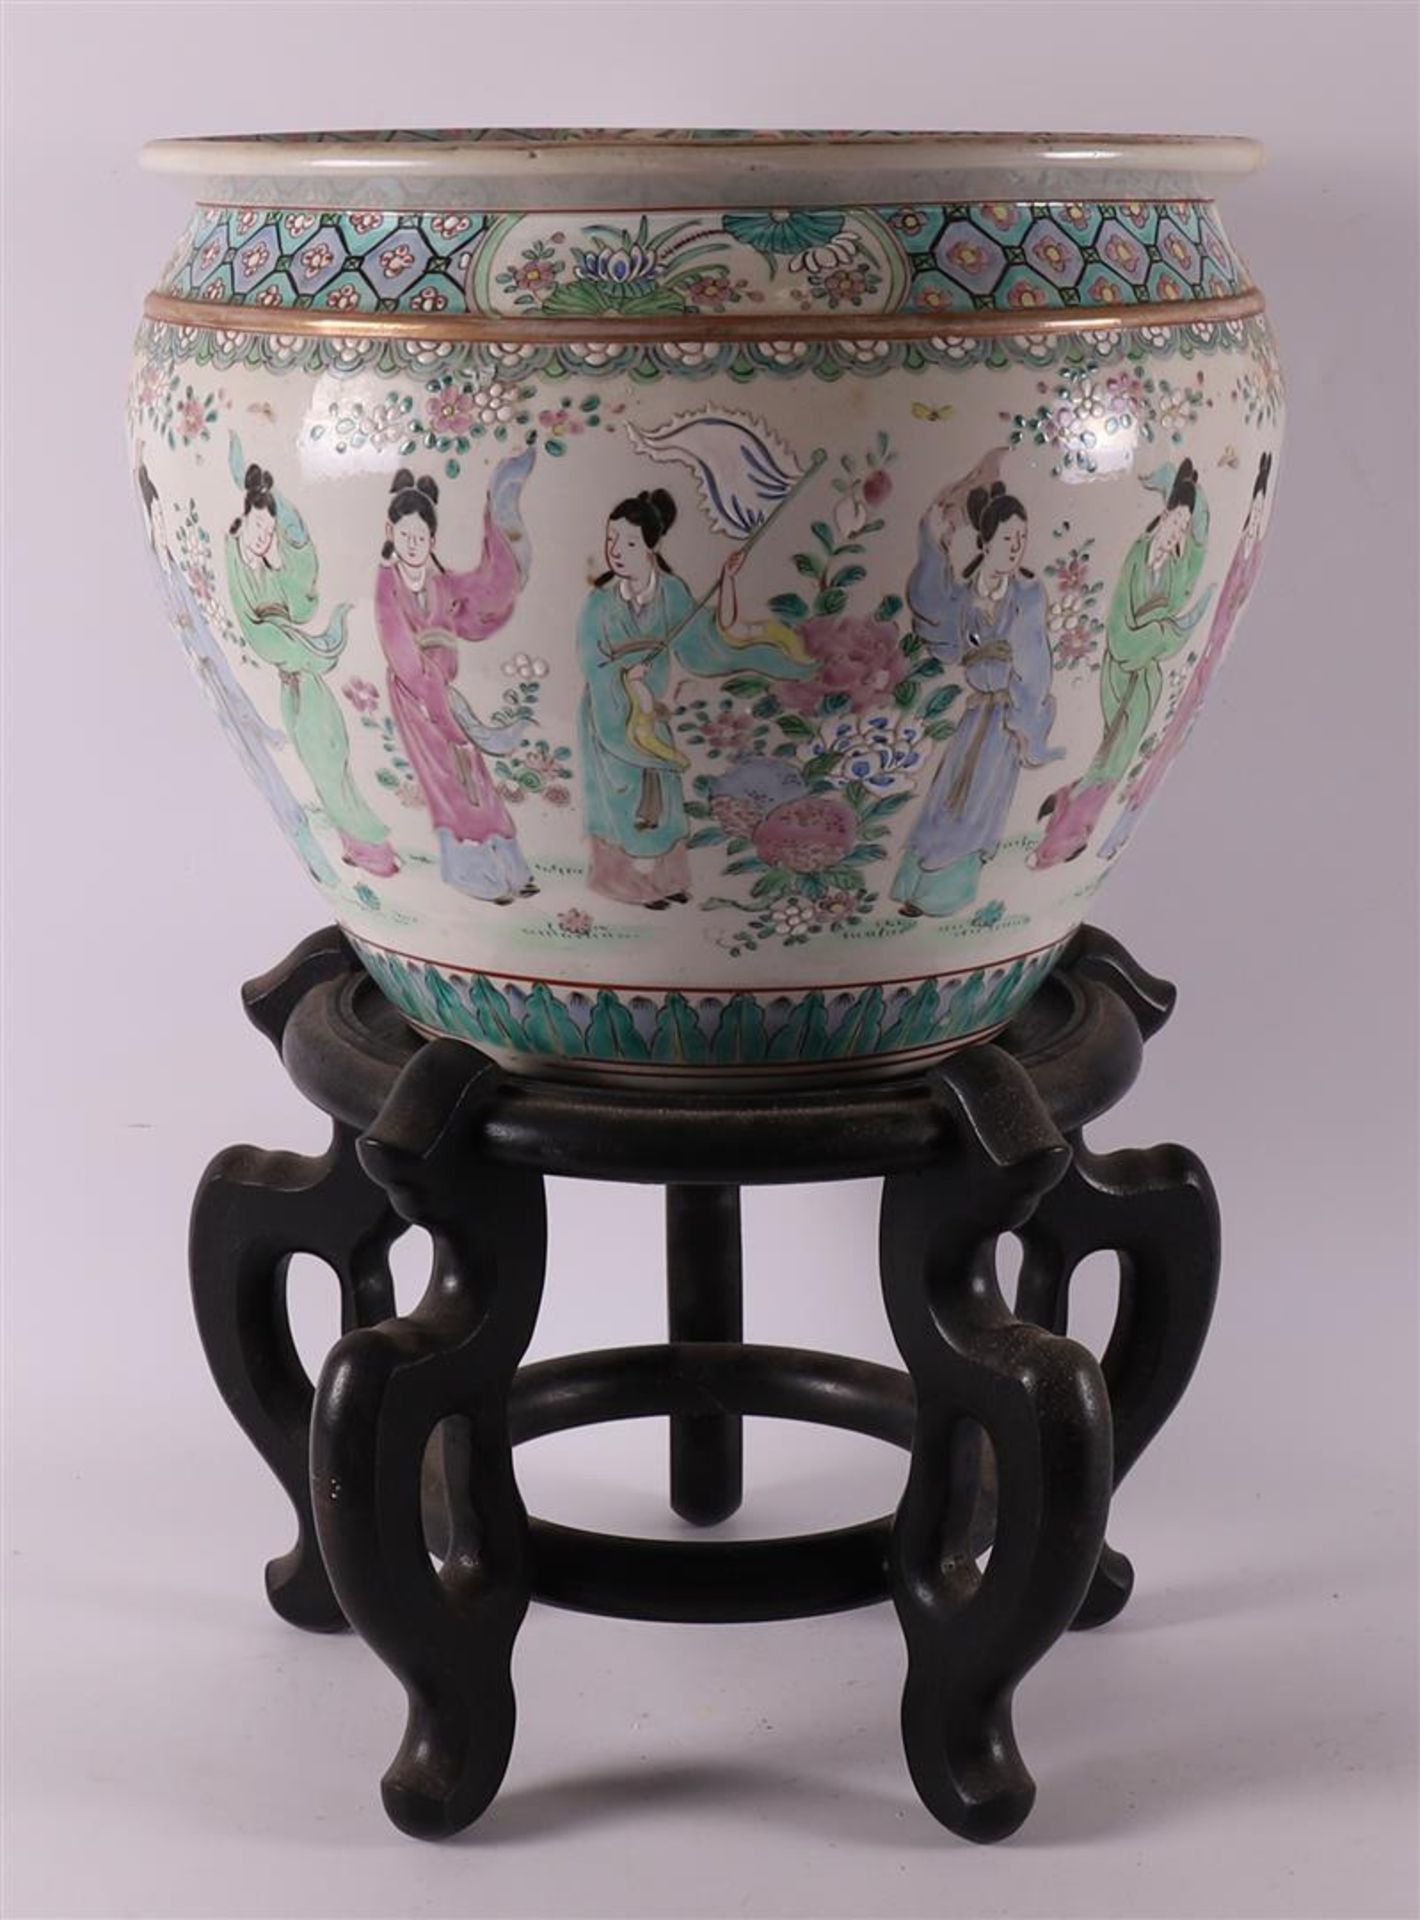 A porcelain cachepot or fishbowl on a loose wooden base, China, 20th century.